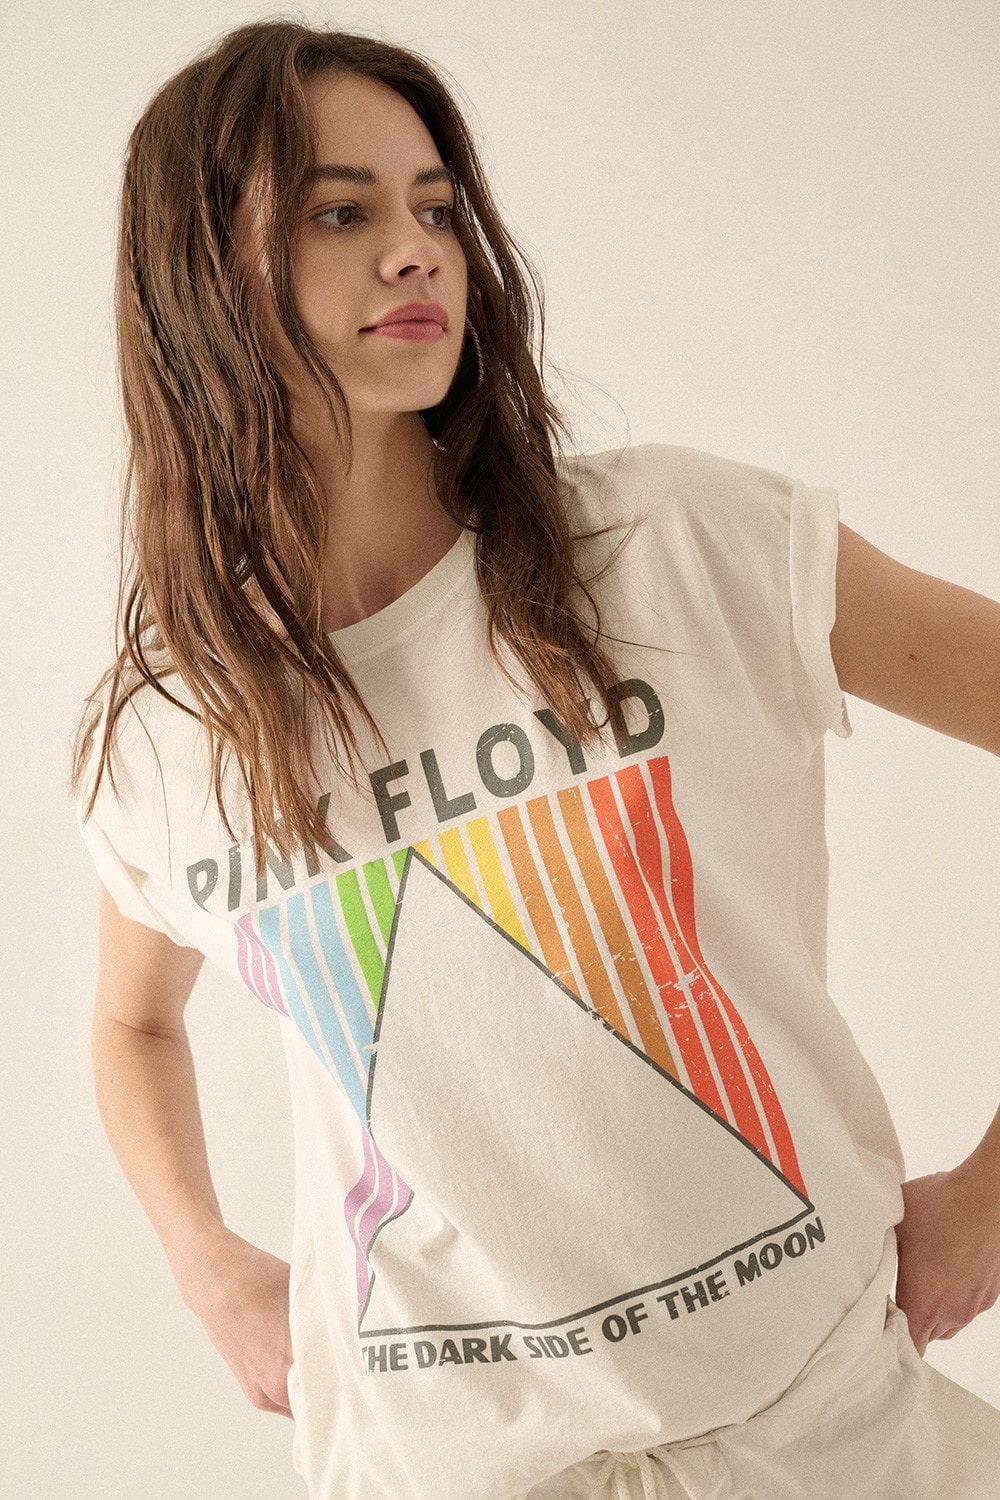 Make a statement with this bold, vintage-style Pink Floyd t-shirt! With a Dark Side of the Moon print, colorful rainbow stripes, and drop shoulder, it'll be the trippiest thing in your wardrobe. Get ready to rock out in style!